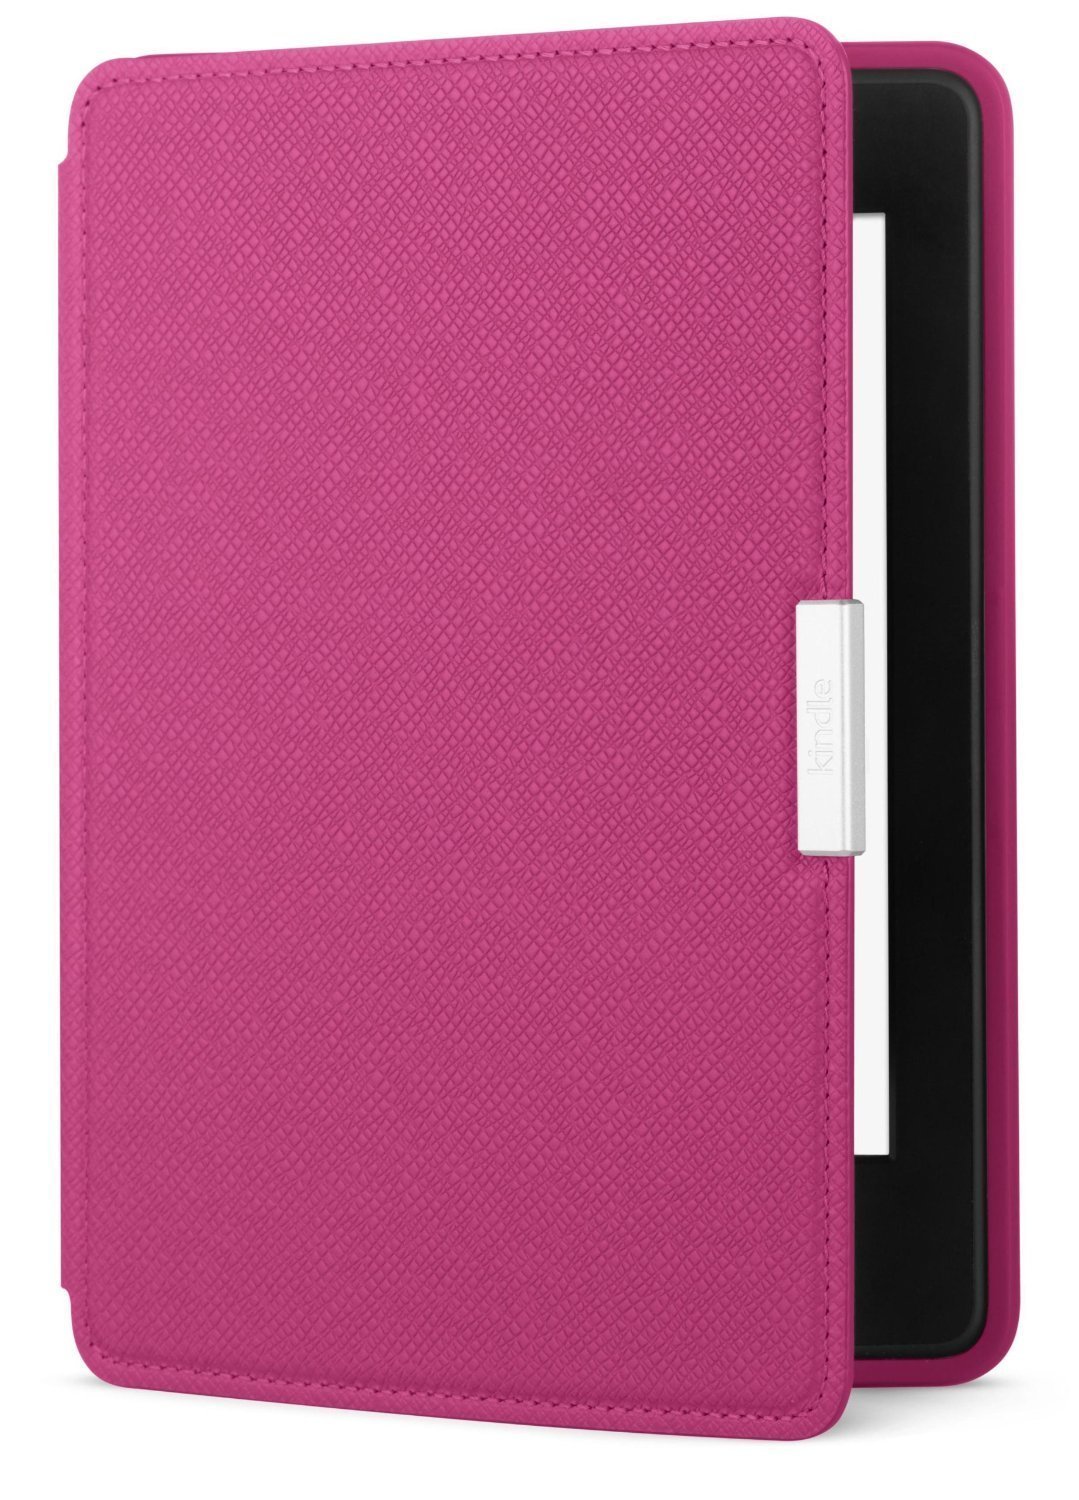 Book Cover Amazon Kindle Paperwhite Leather Case, Ink Fuchsia - fits all Paperwhite generations prior to 2018 (Will not fit All-new Paperwhite 10th generation)